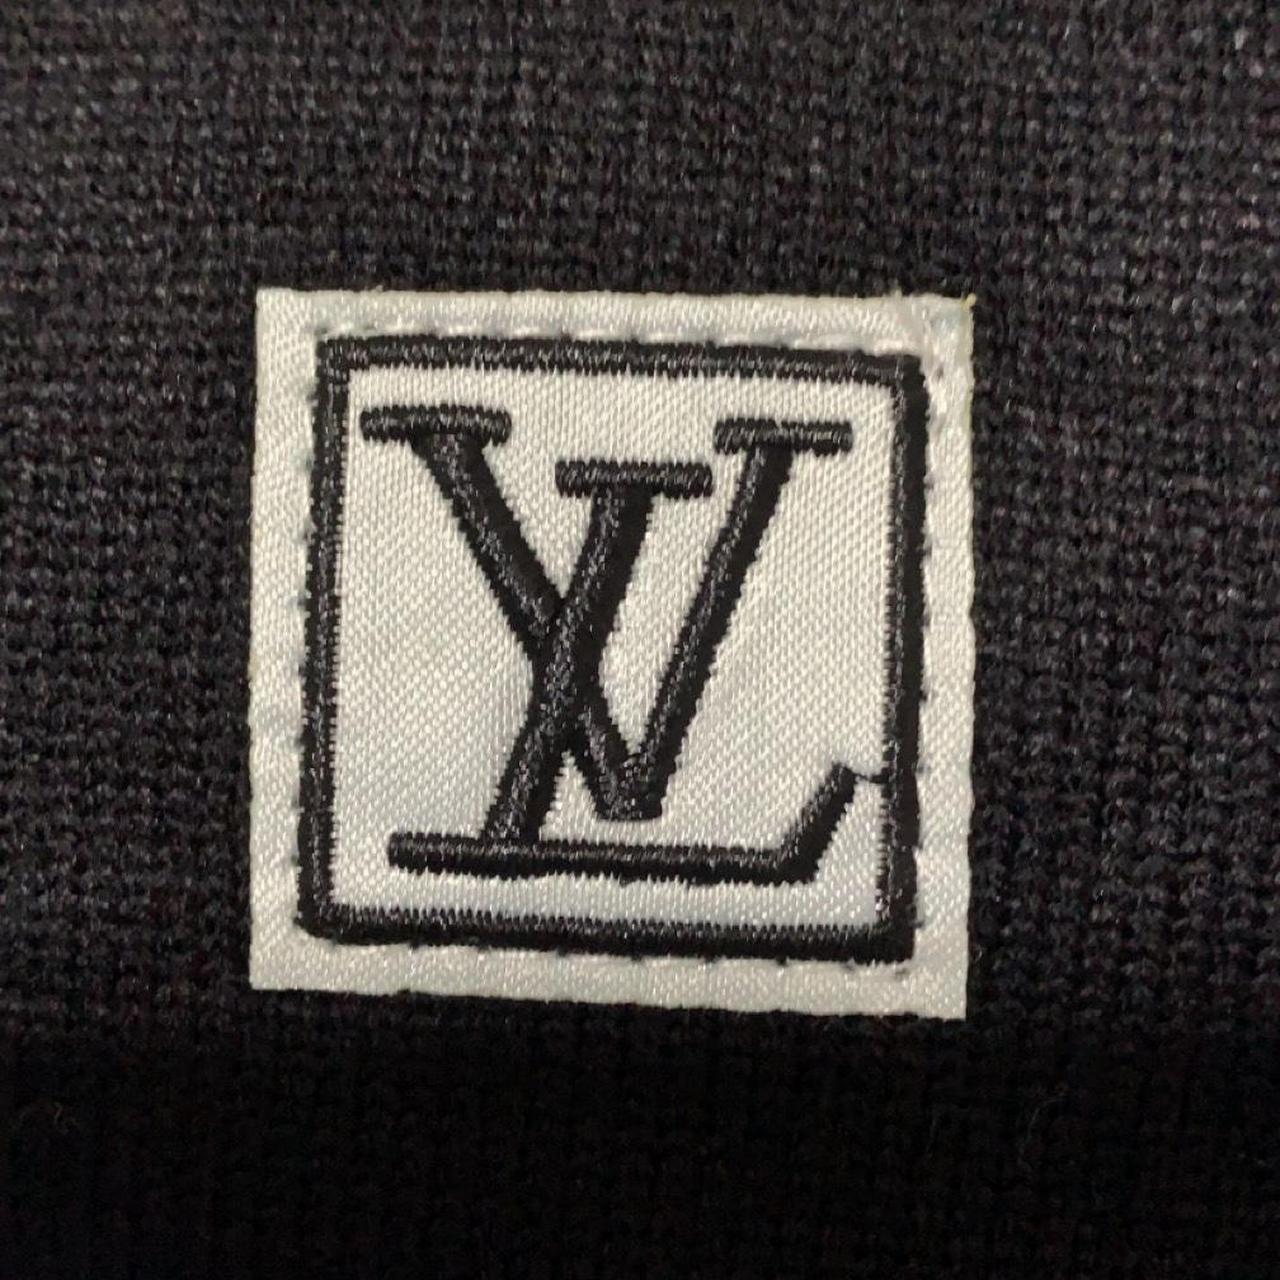 BRAND NEW Louis Vuitton Beanie. 100% Authentic and - Depop